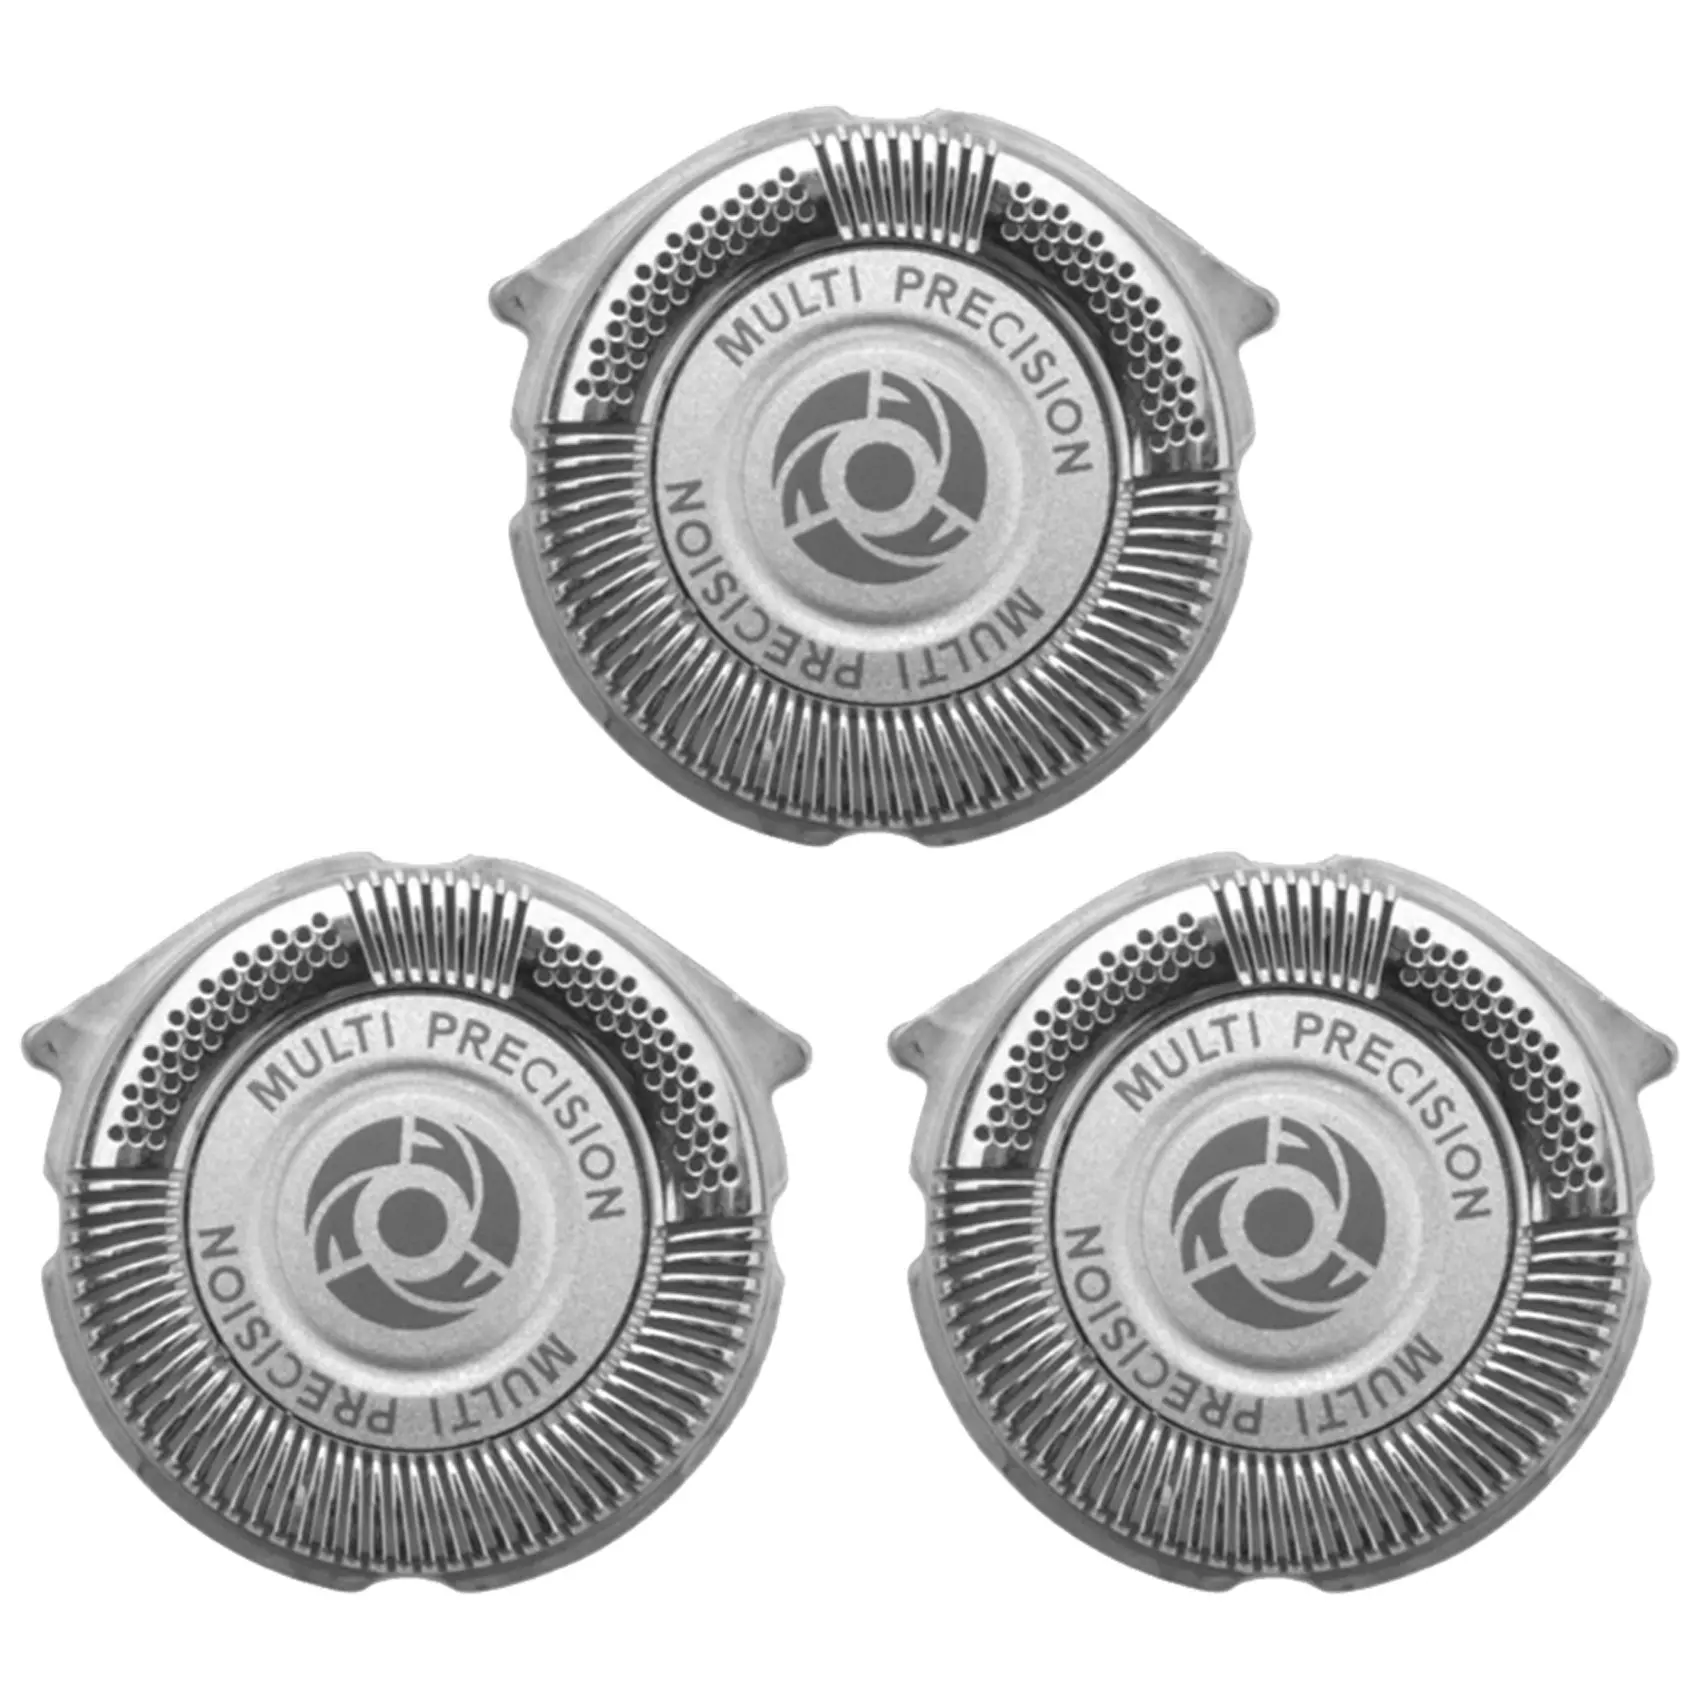 

3 Pieces SH50/52 Shaver Replacement Heads for Philips Norelco Series 5000 and AquaTouch Shavers